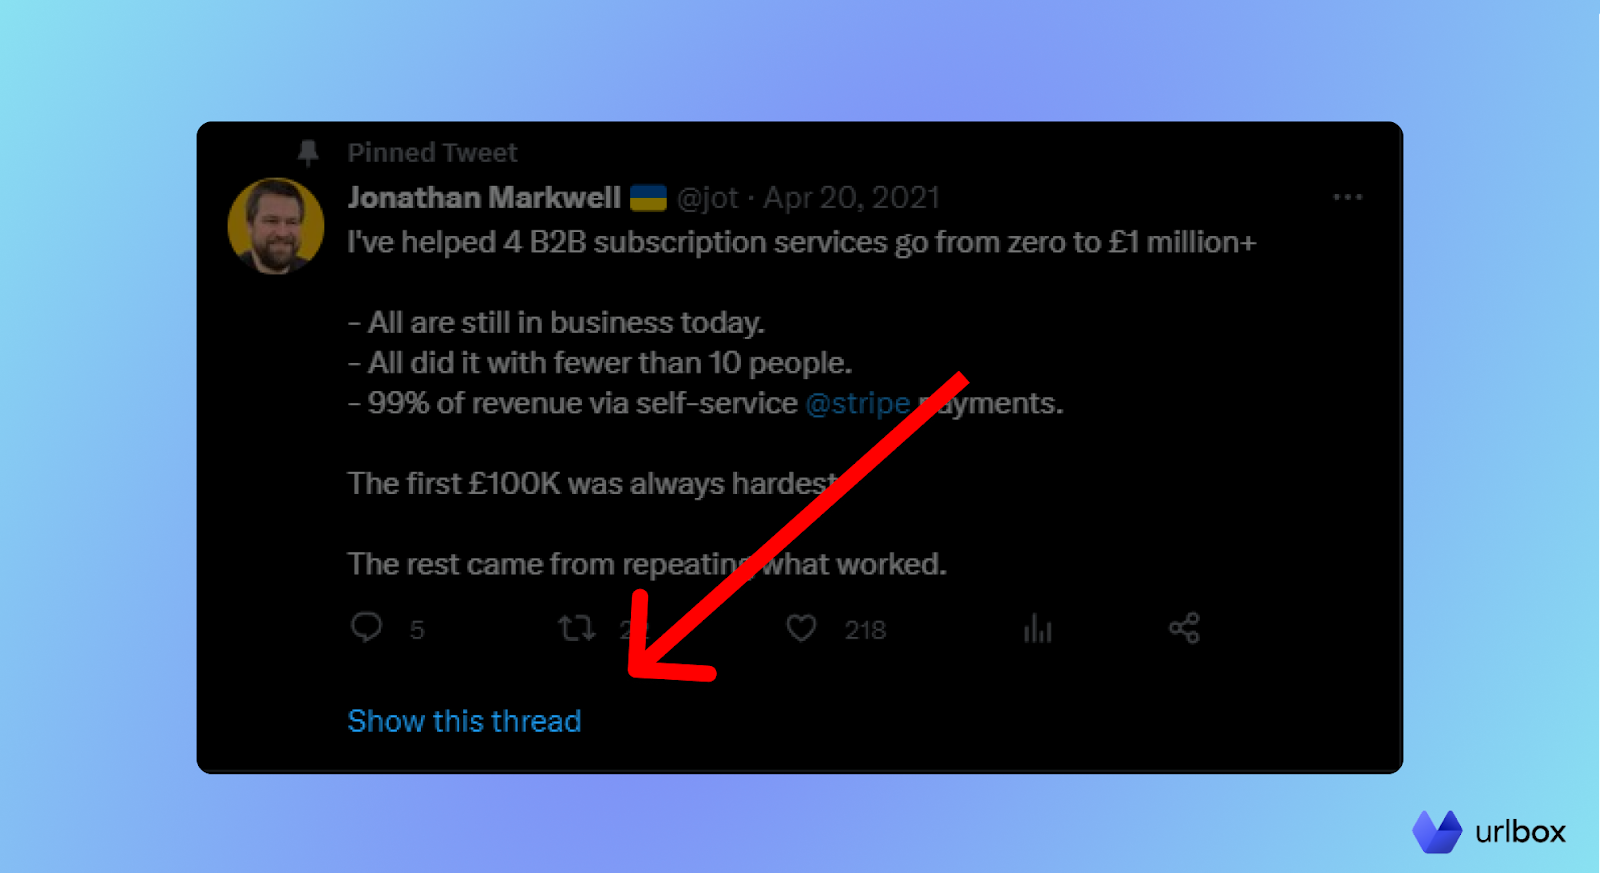 Make Threads Button always visible (on mobile) – Discord